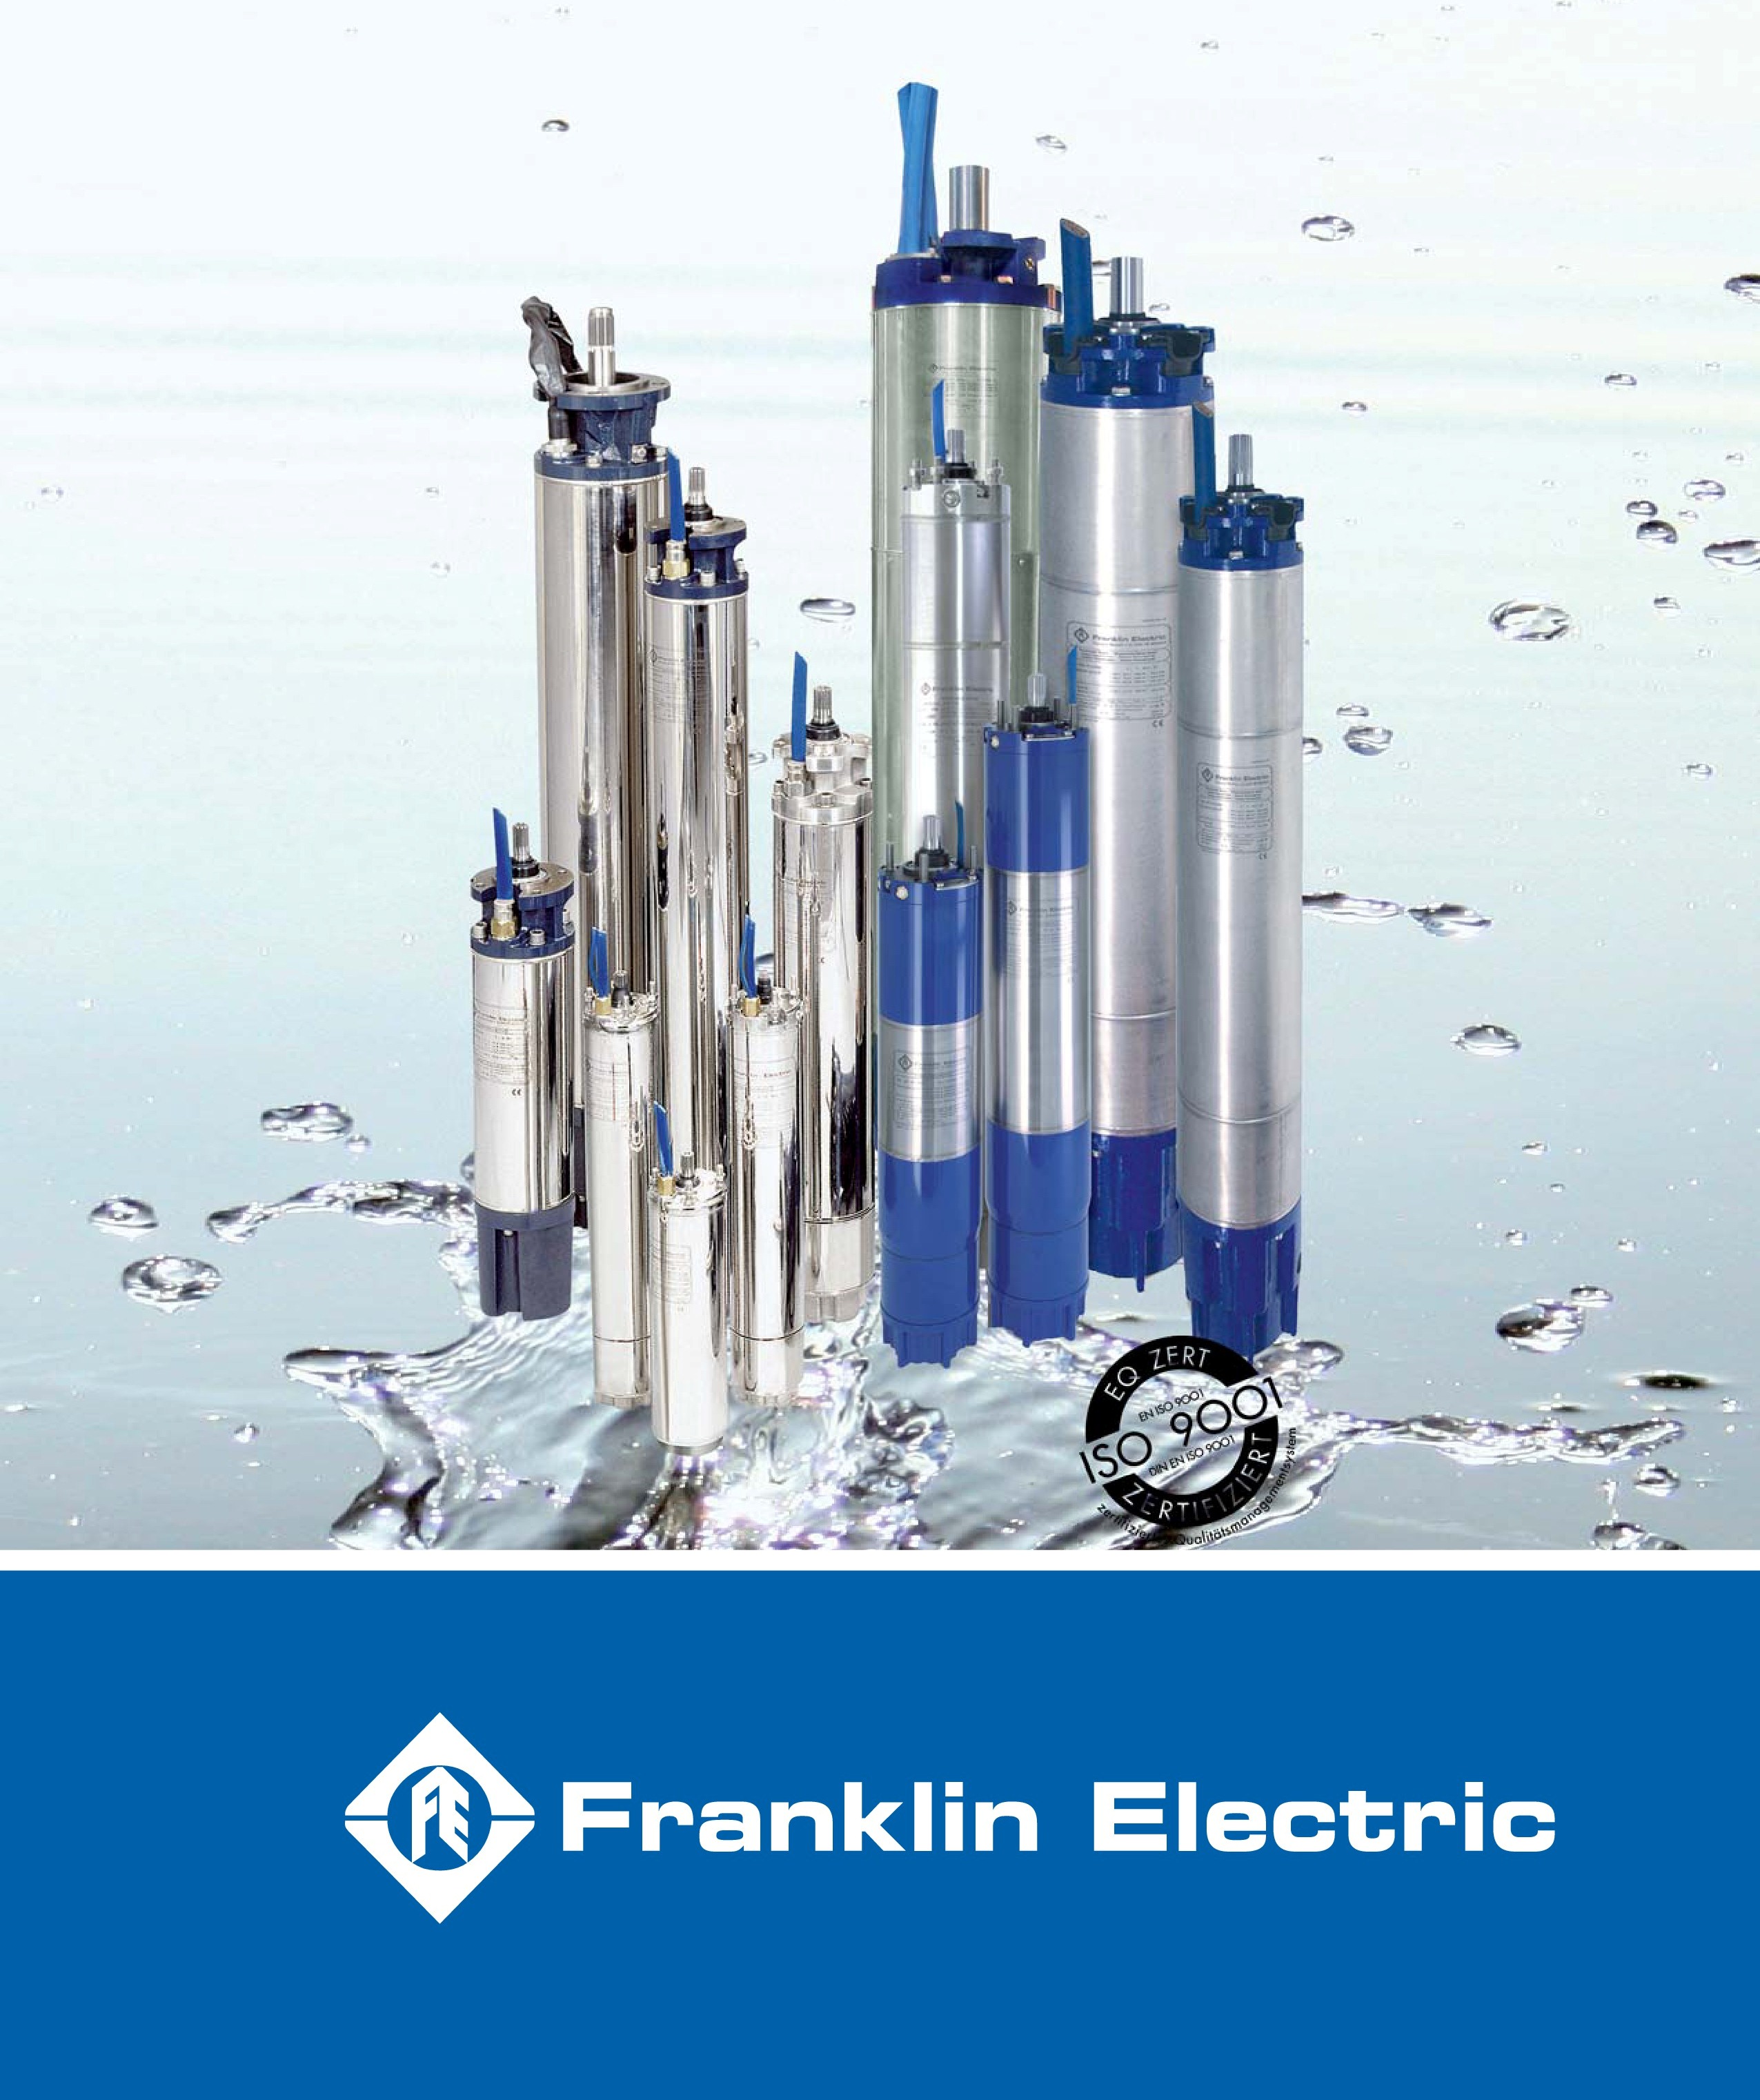 Franklin Electric submersible motors